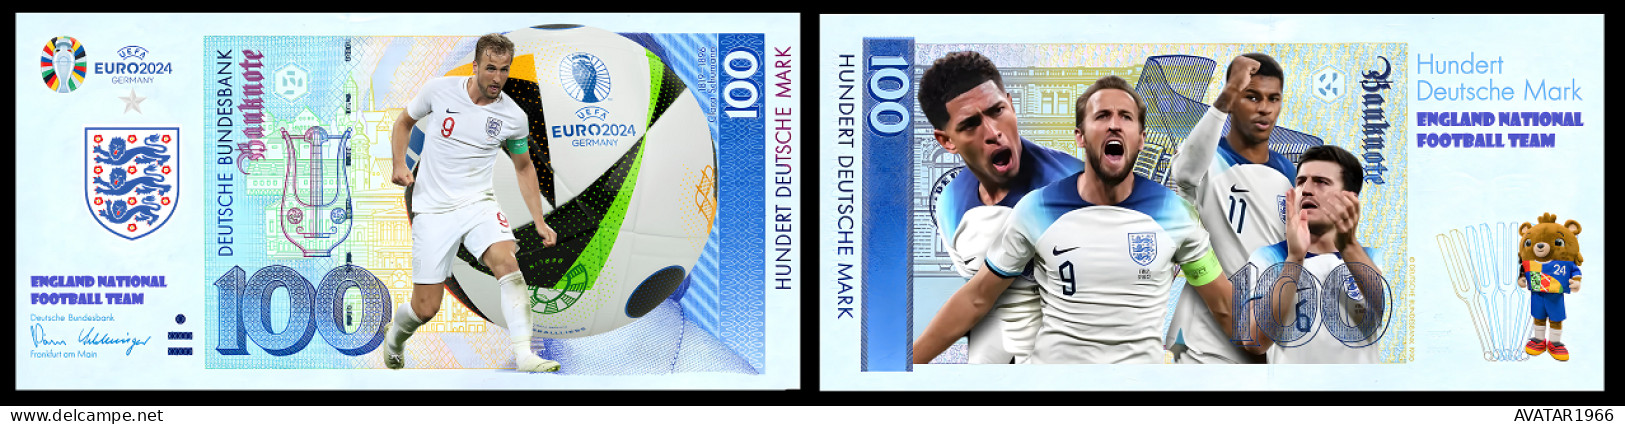 UEFA European Football Championship 2024 qualified country England 8 pieces Germany fantasy paper money